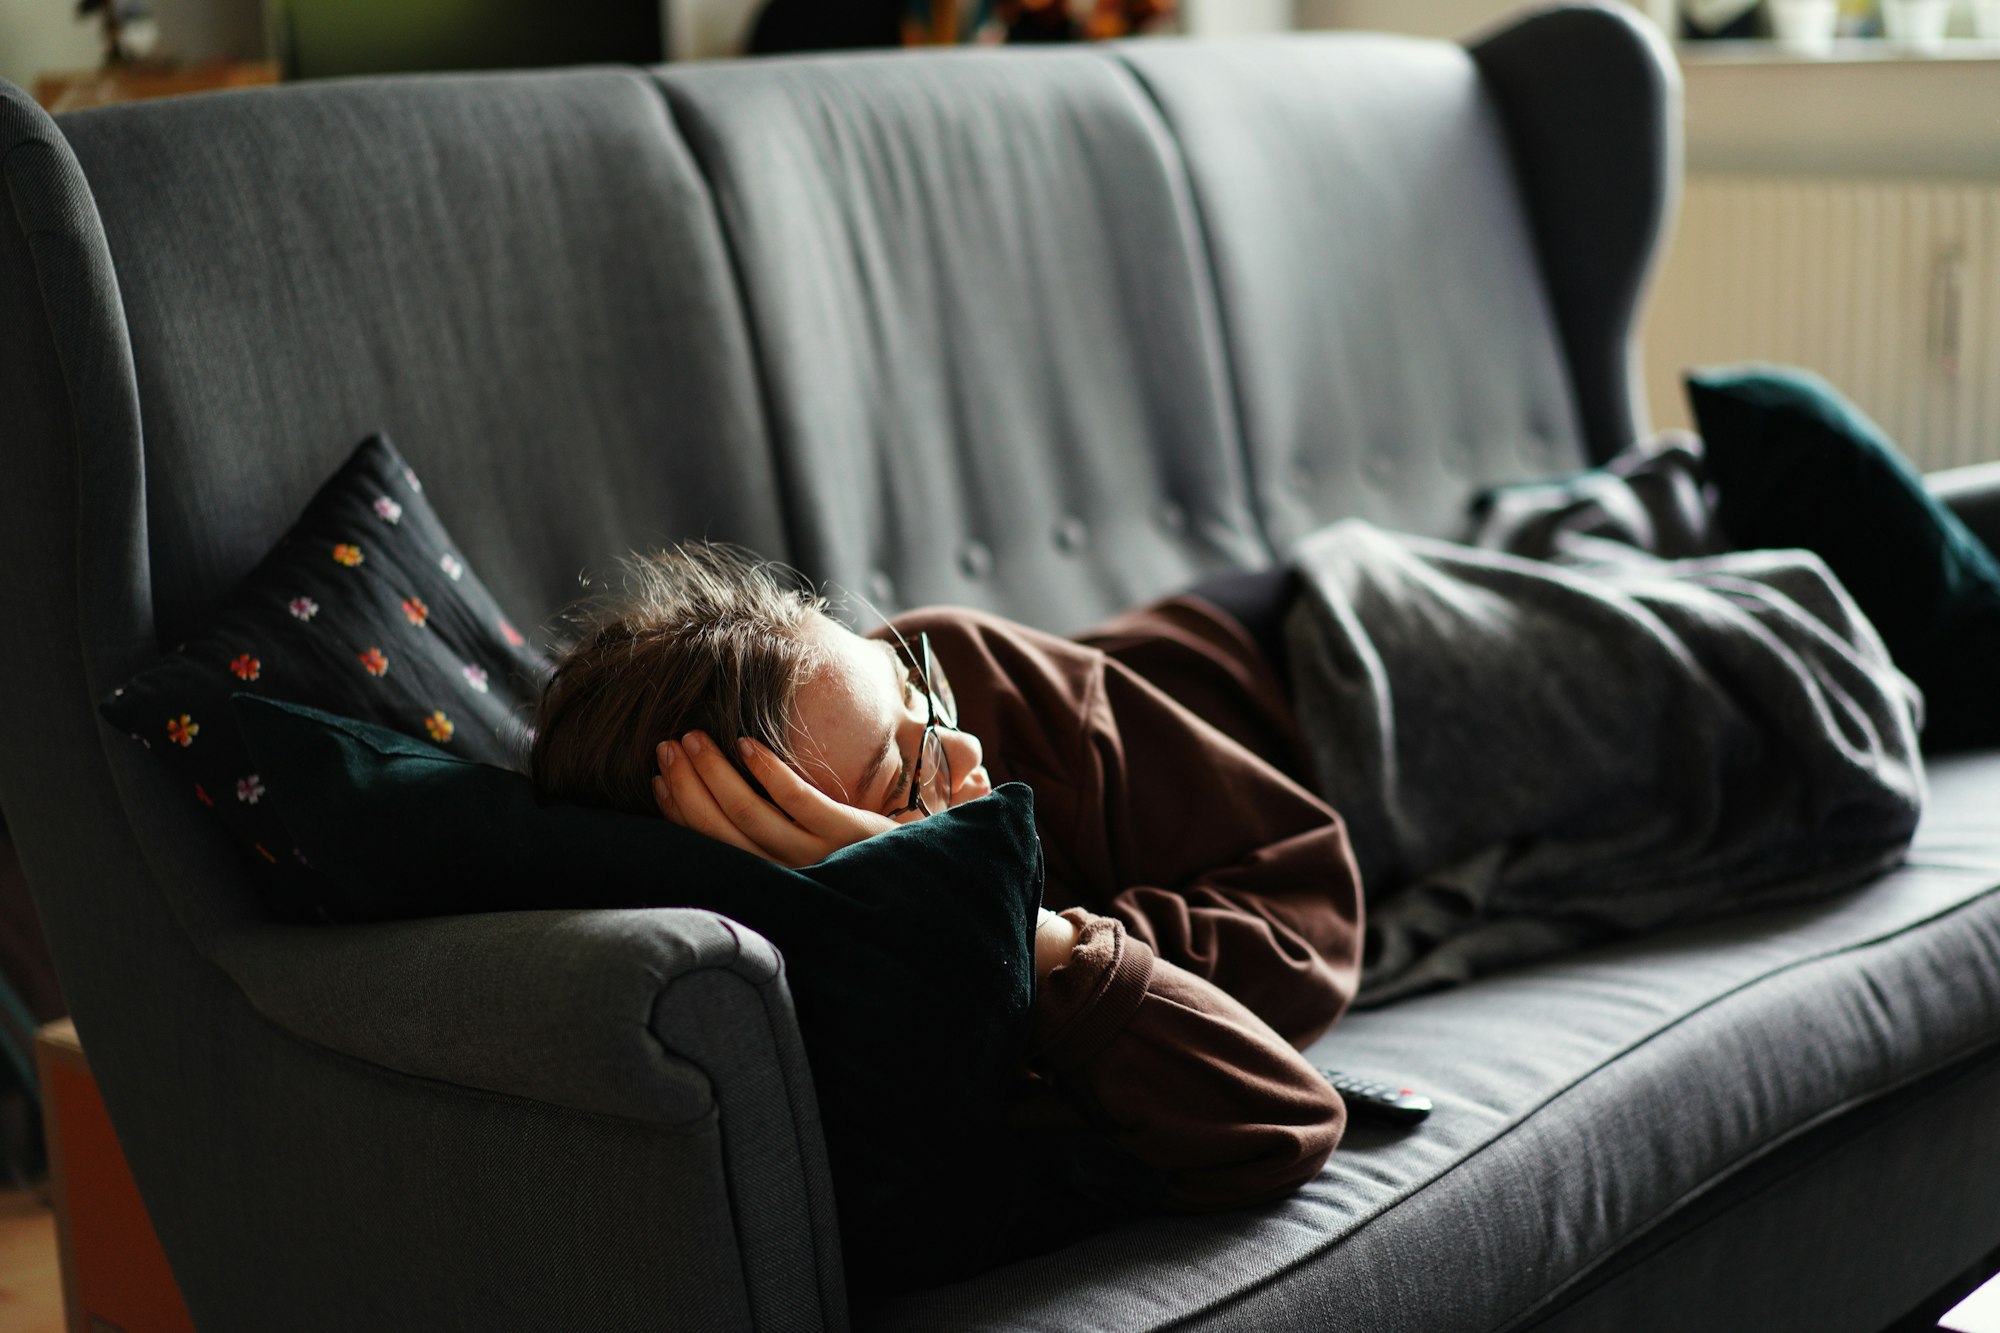 A person having a nap on the couch